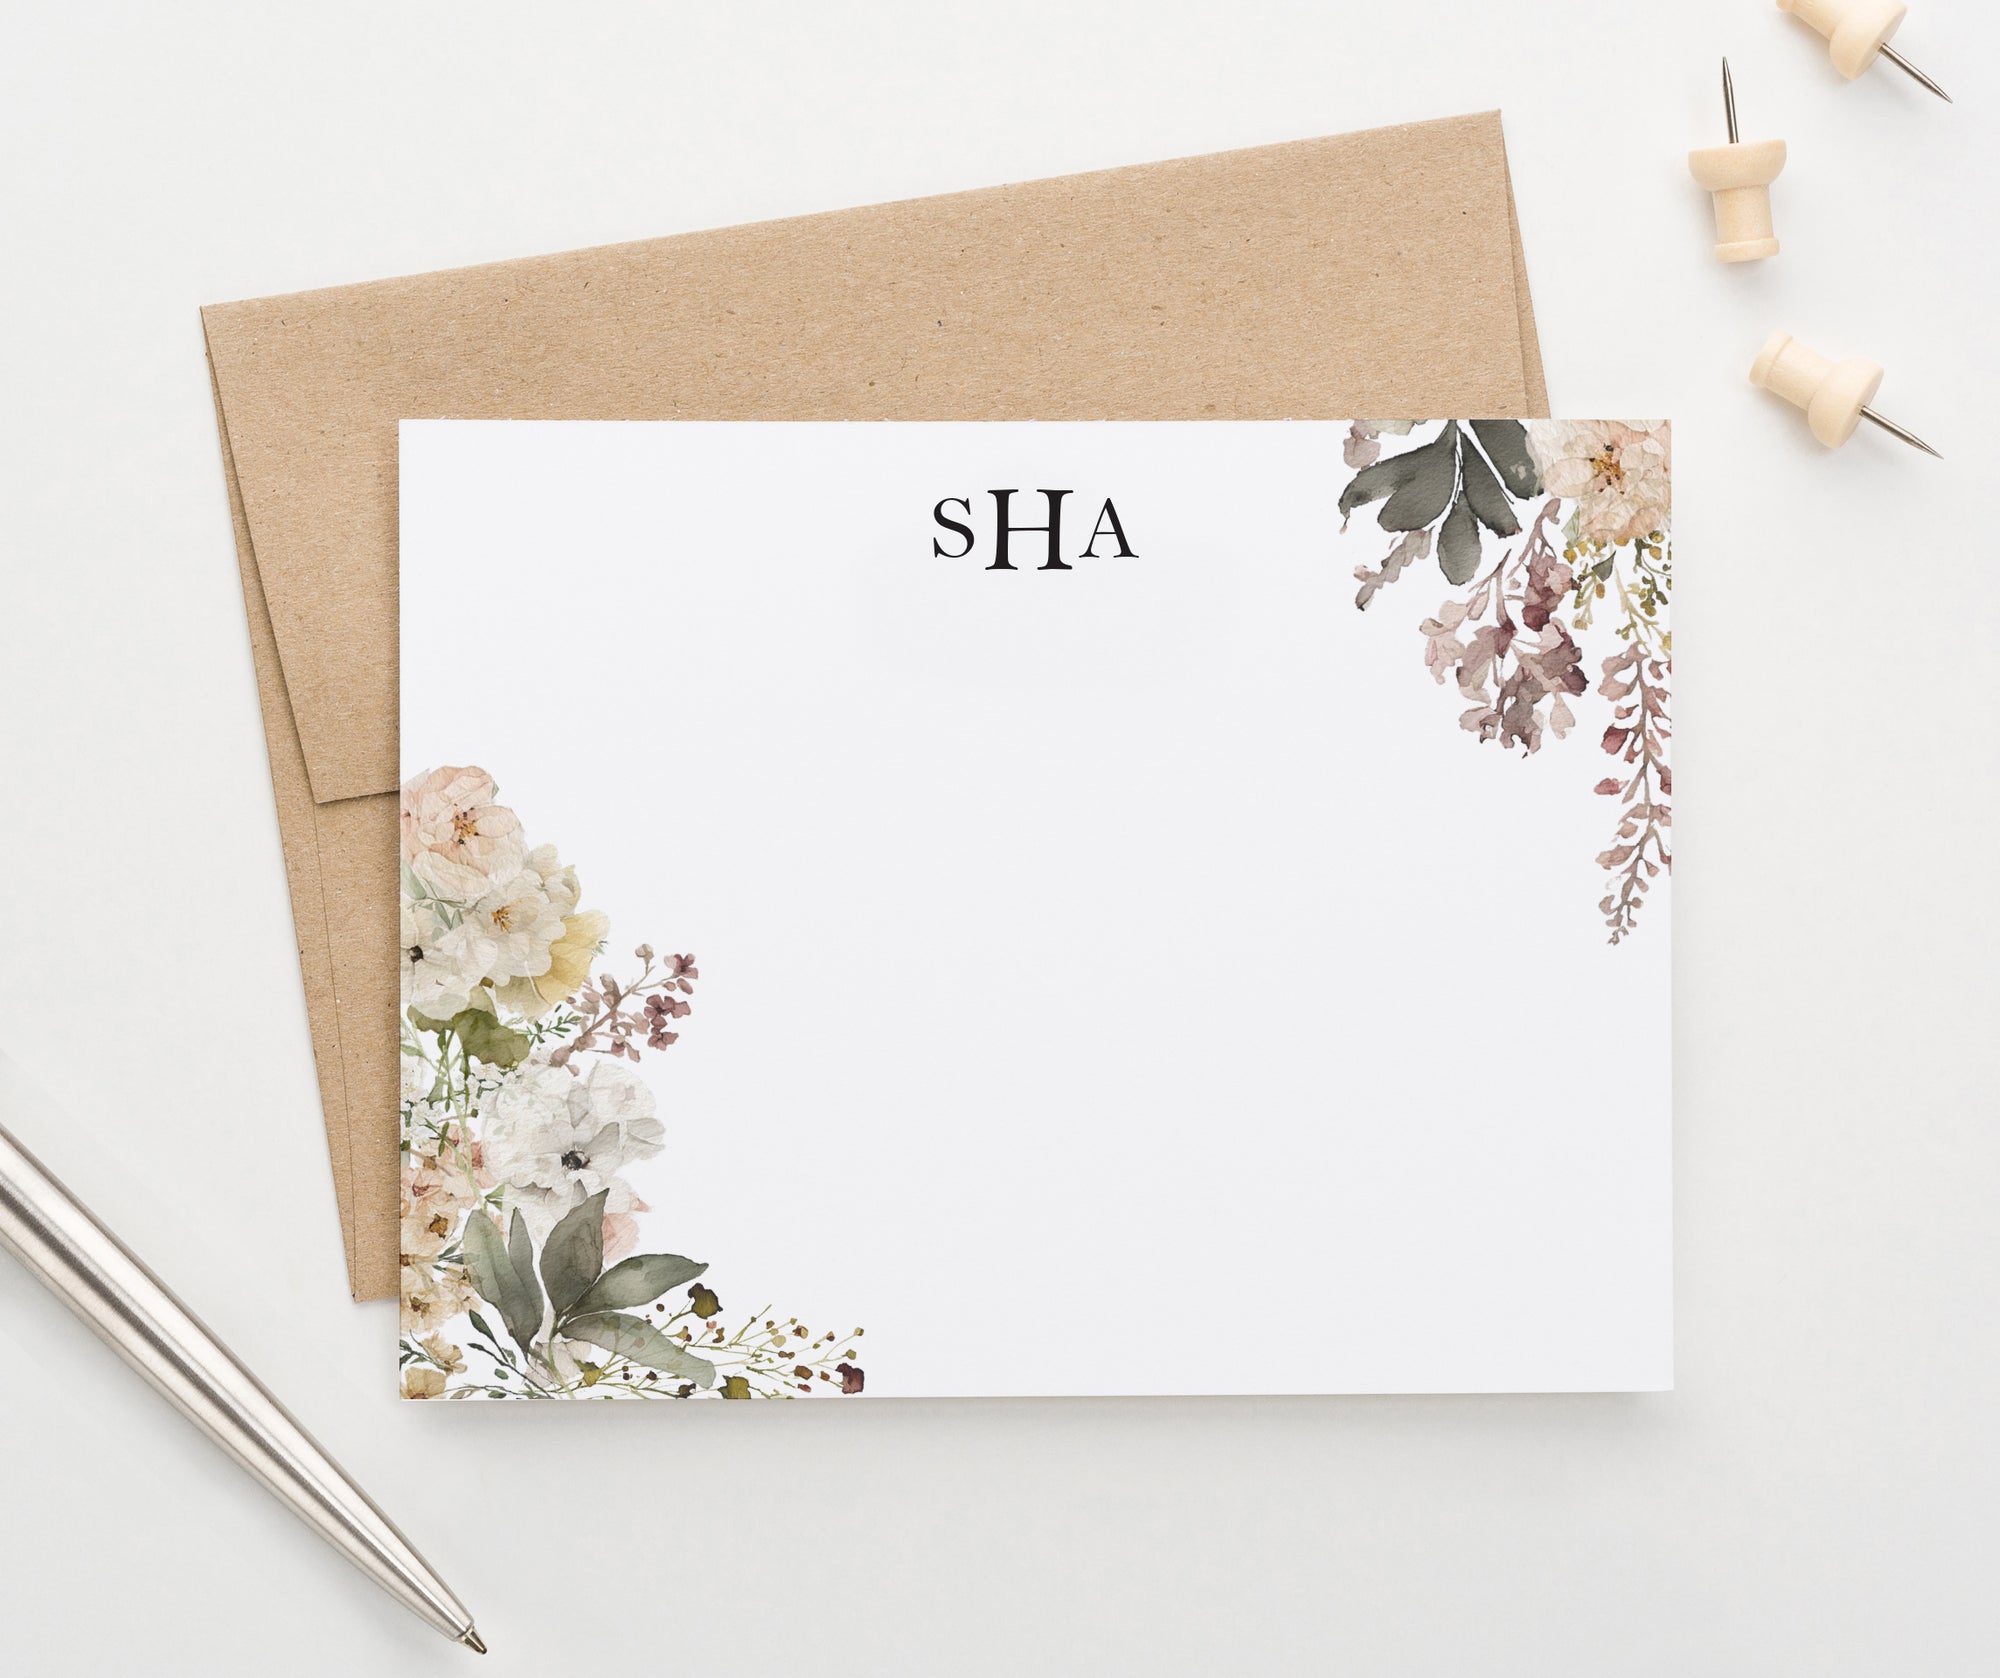 Personalized Elegant Monogrammed Stationery With Florals